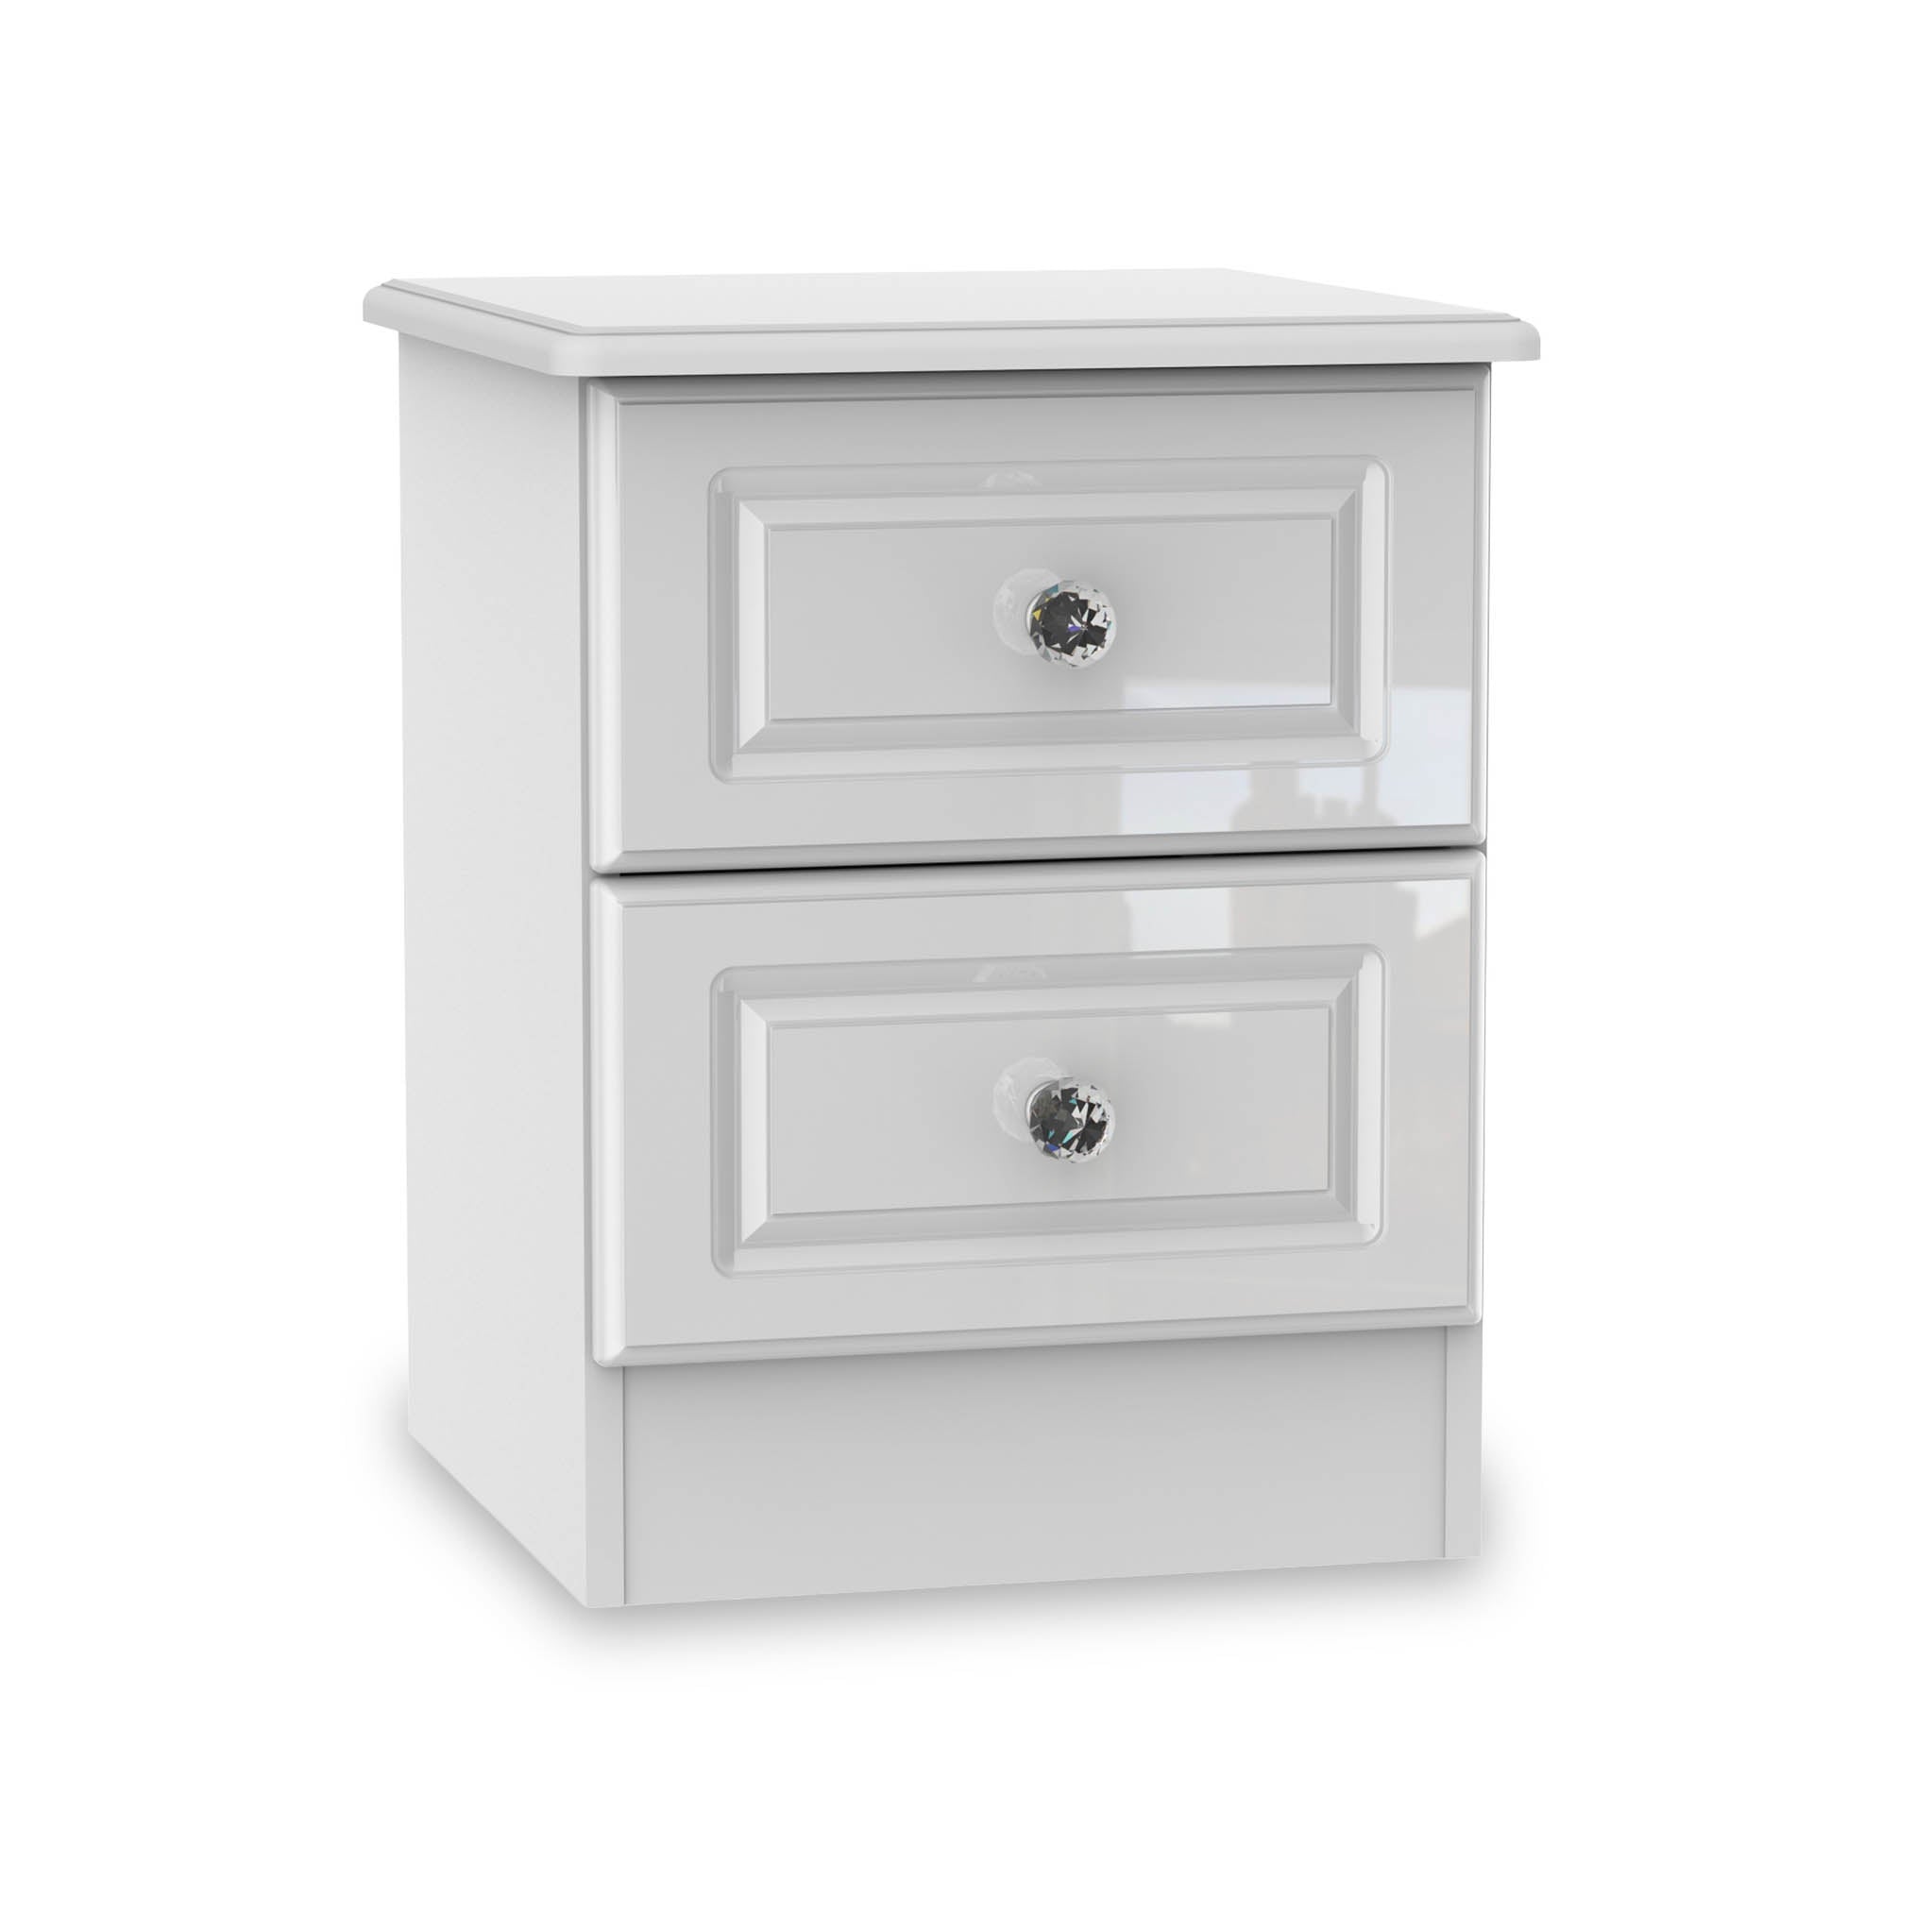 Kinsley White Gloss Contemporary 2 Drawer Bedside Cabinet Roseland